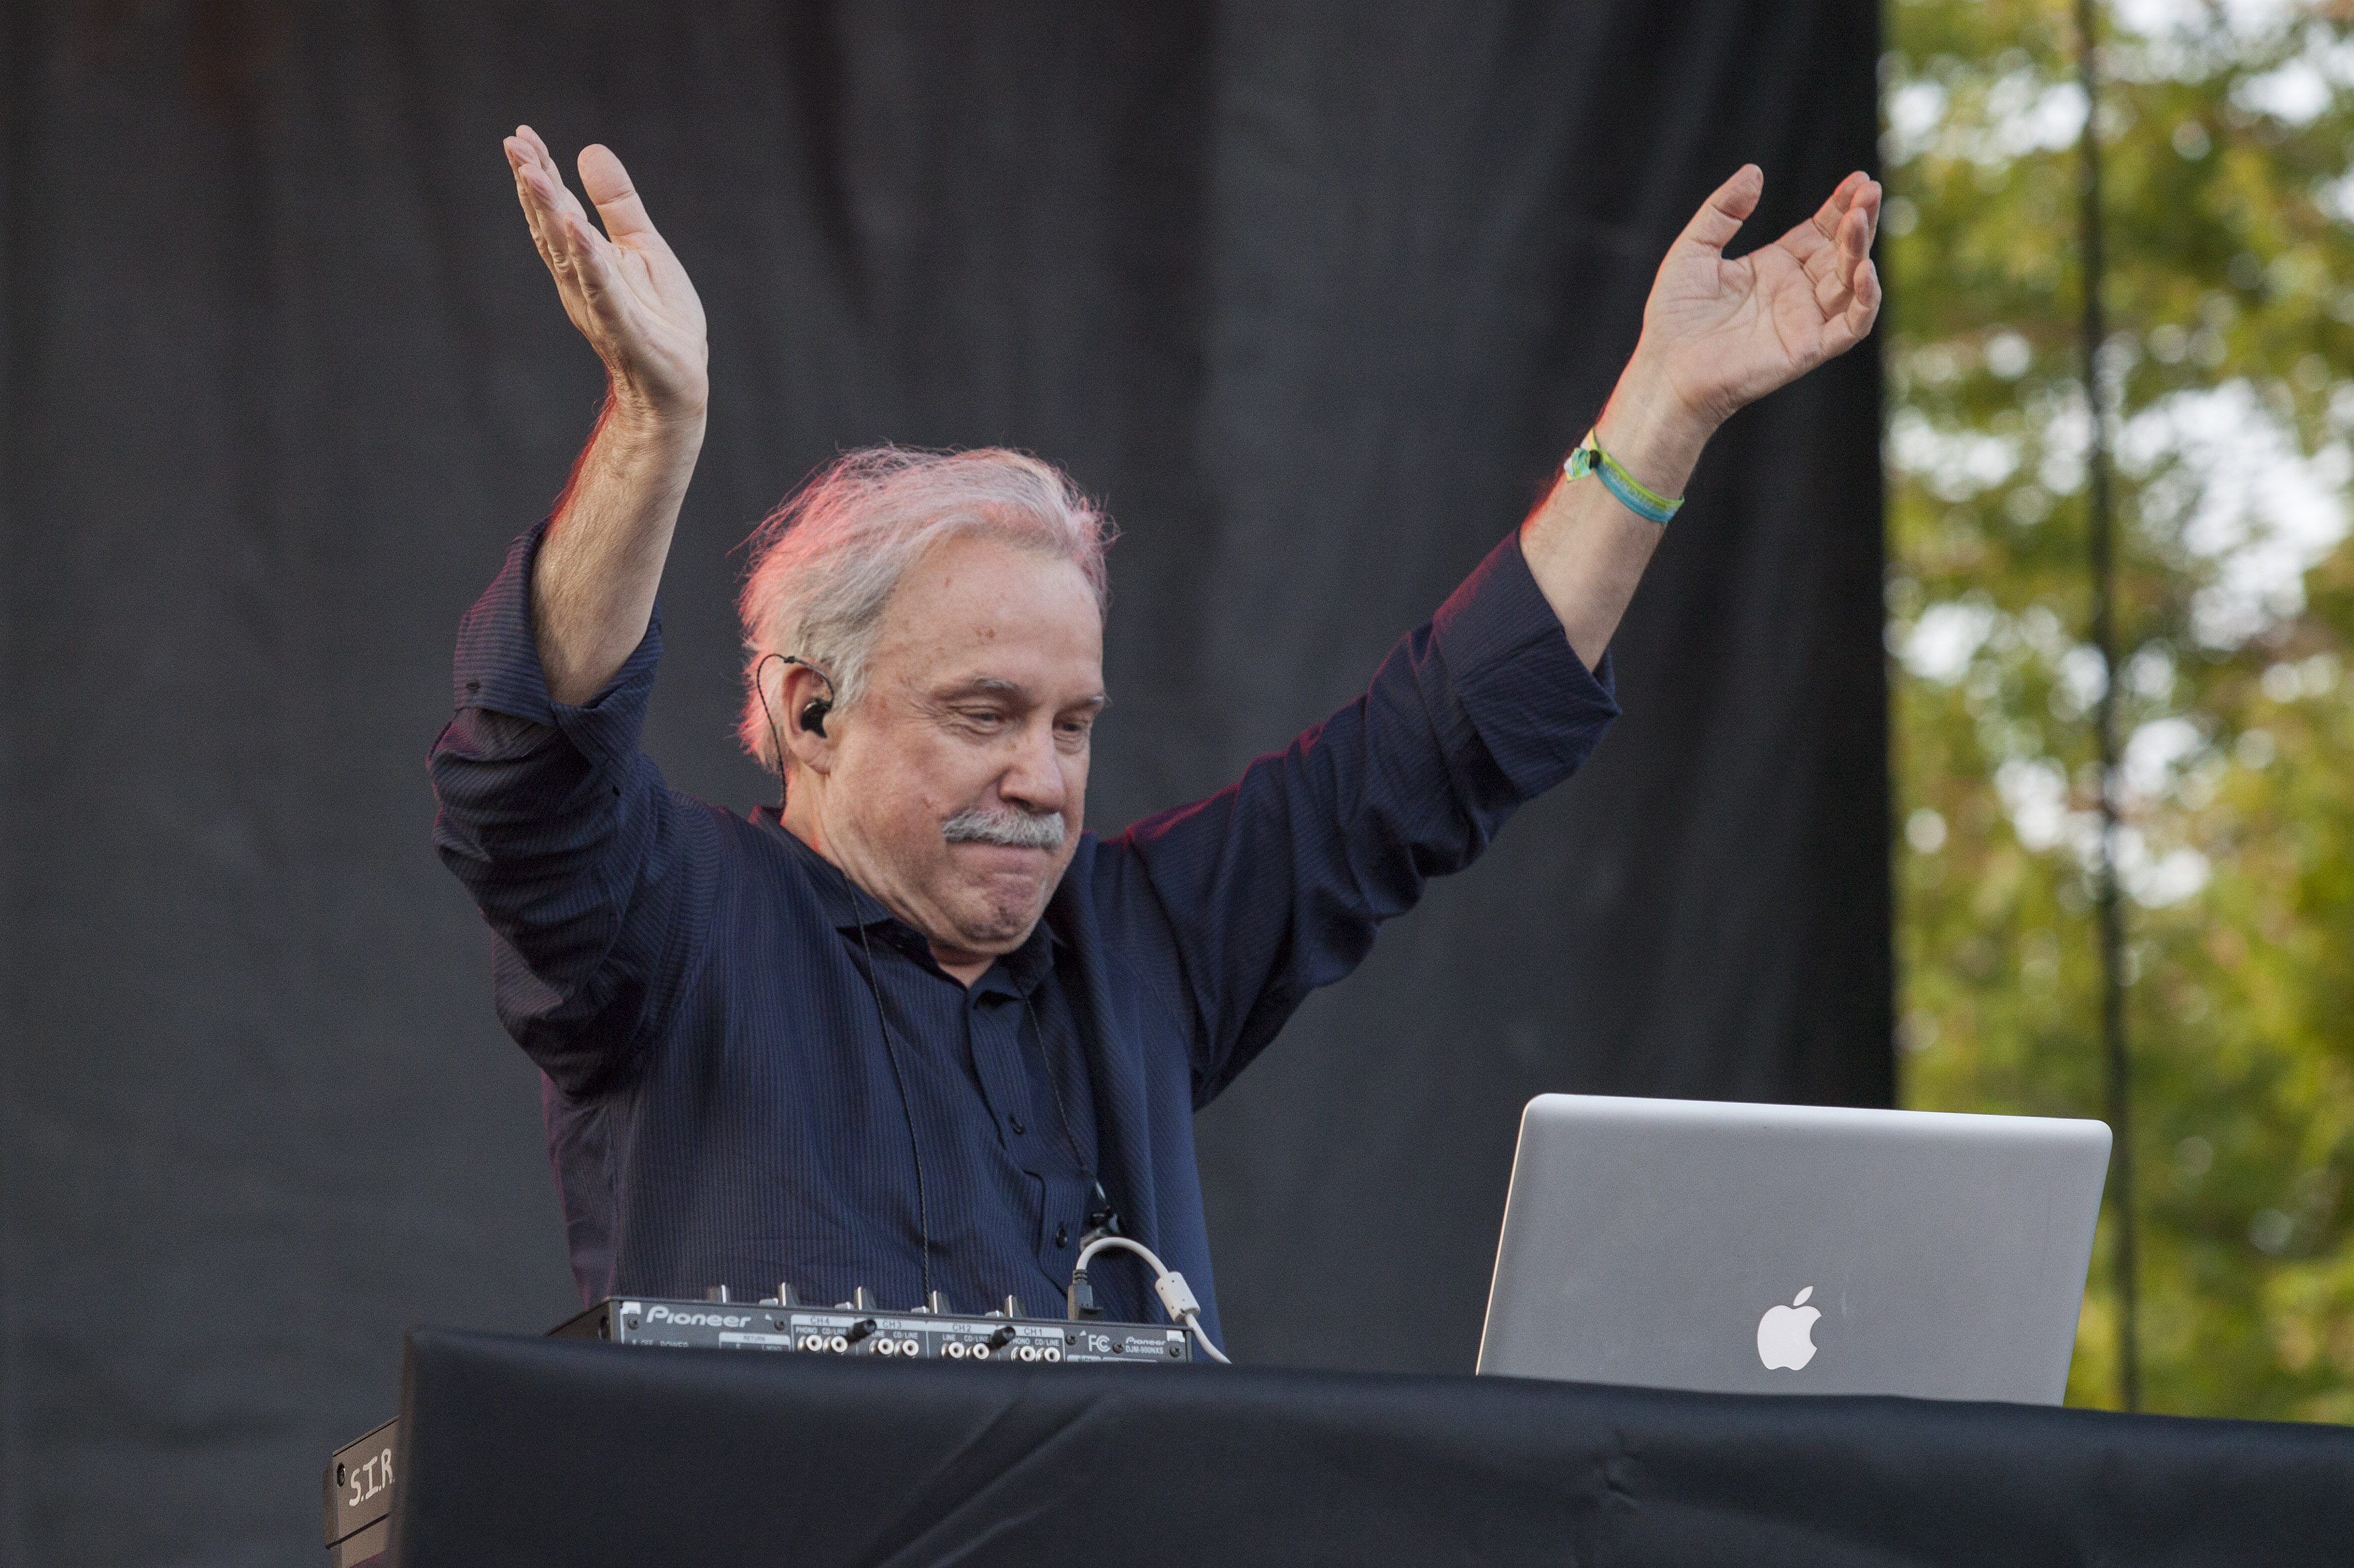 Giorgio Moroder seen at the 2014 Pitchfork Music Festival, on Friday, June 18, 2014 in Chicago. (Photo by Barry Brecheisen/Invision/AP) (Barry Brecheisen&mdash;Barry Brecheisen/Invision/AP)